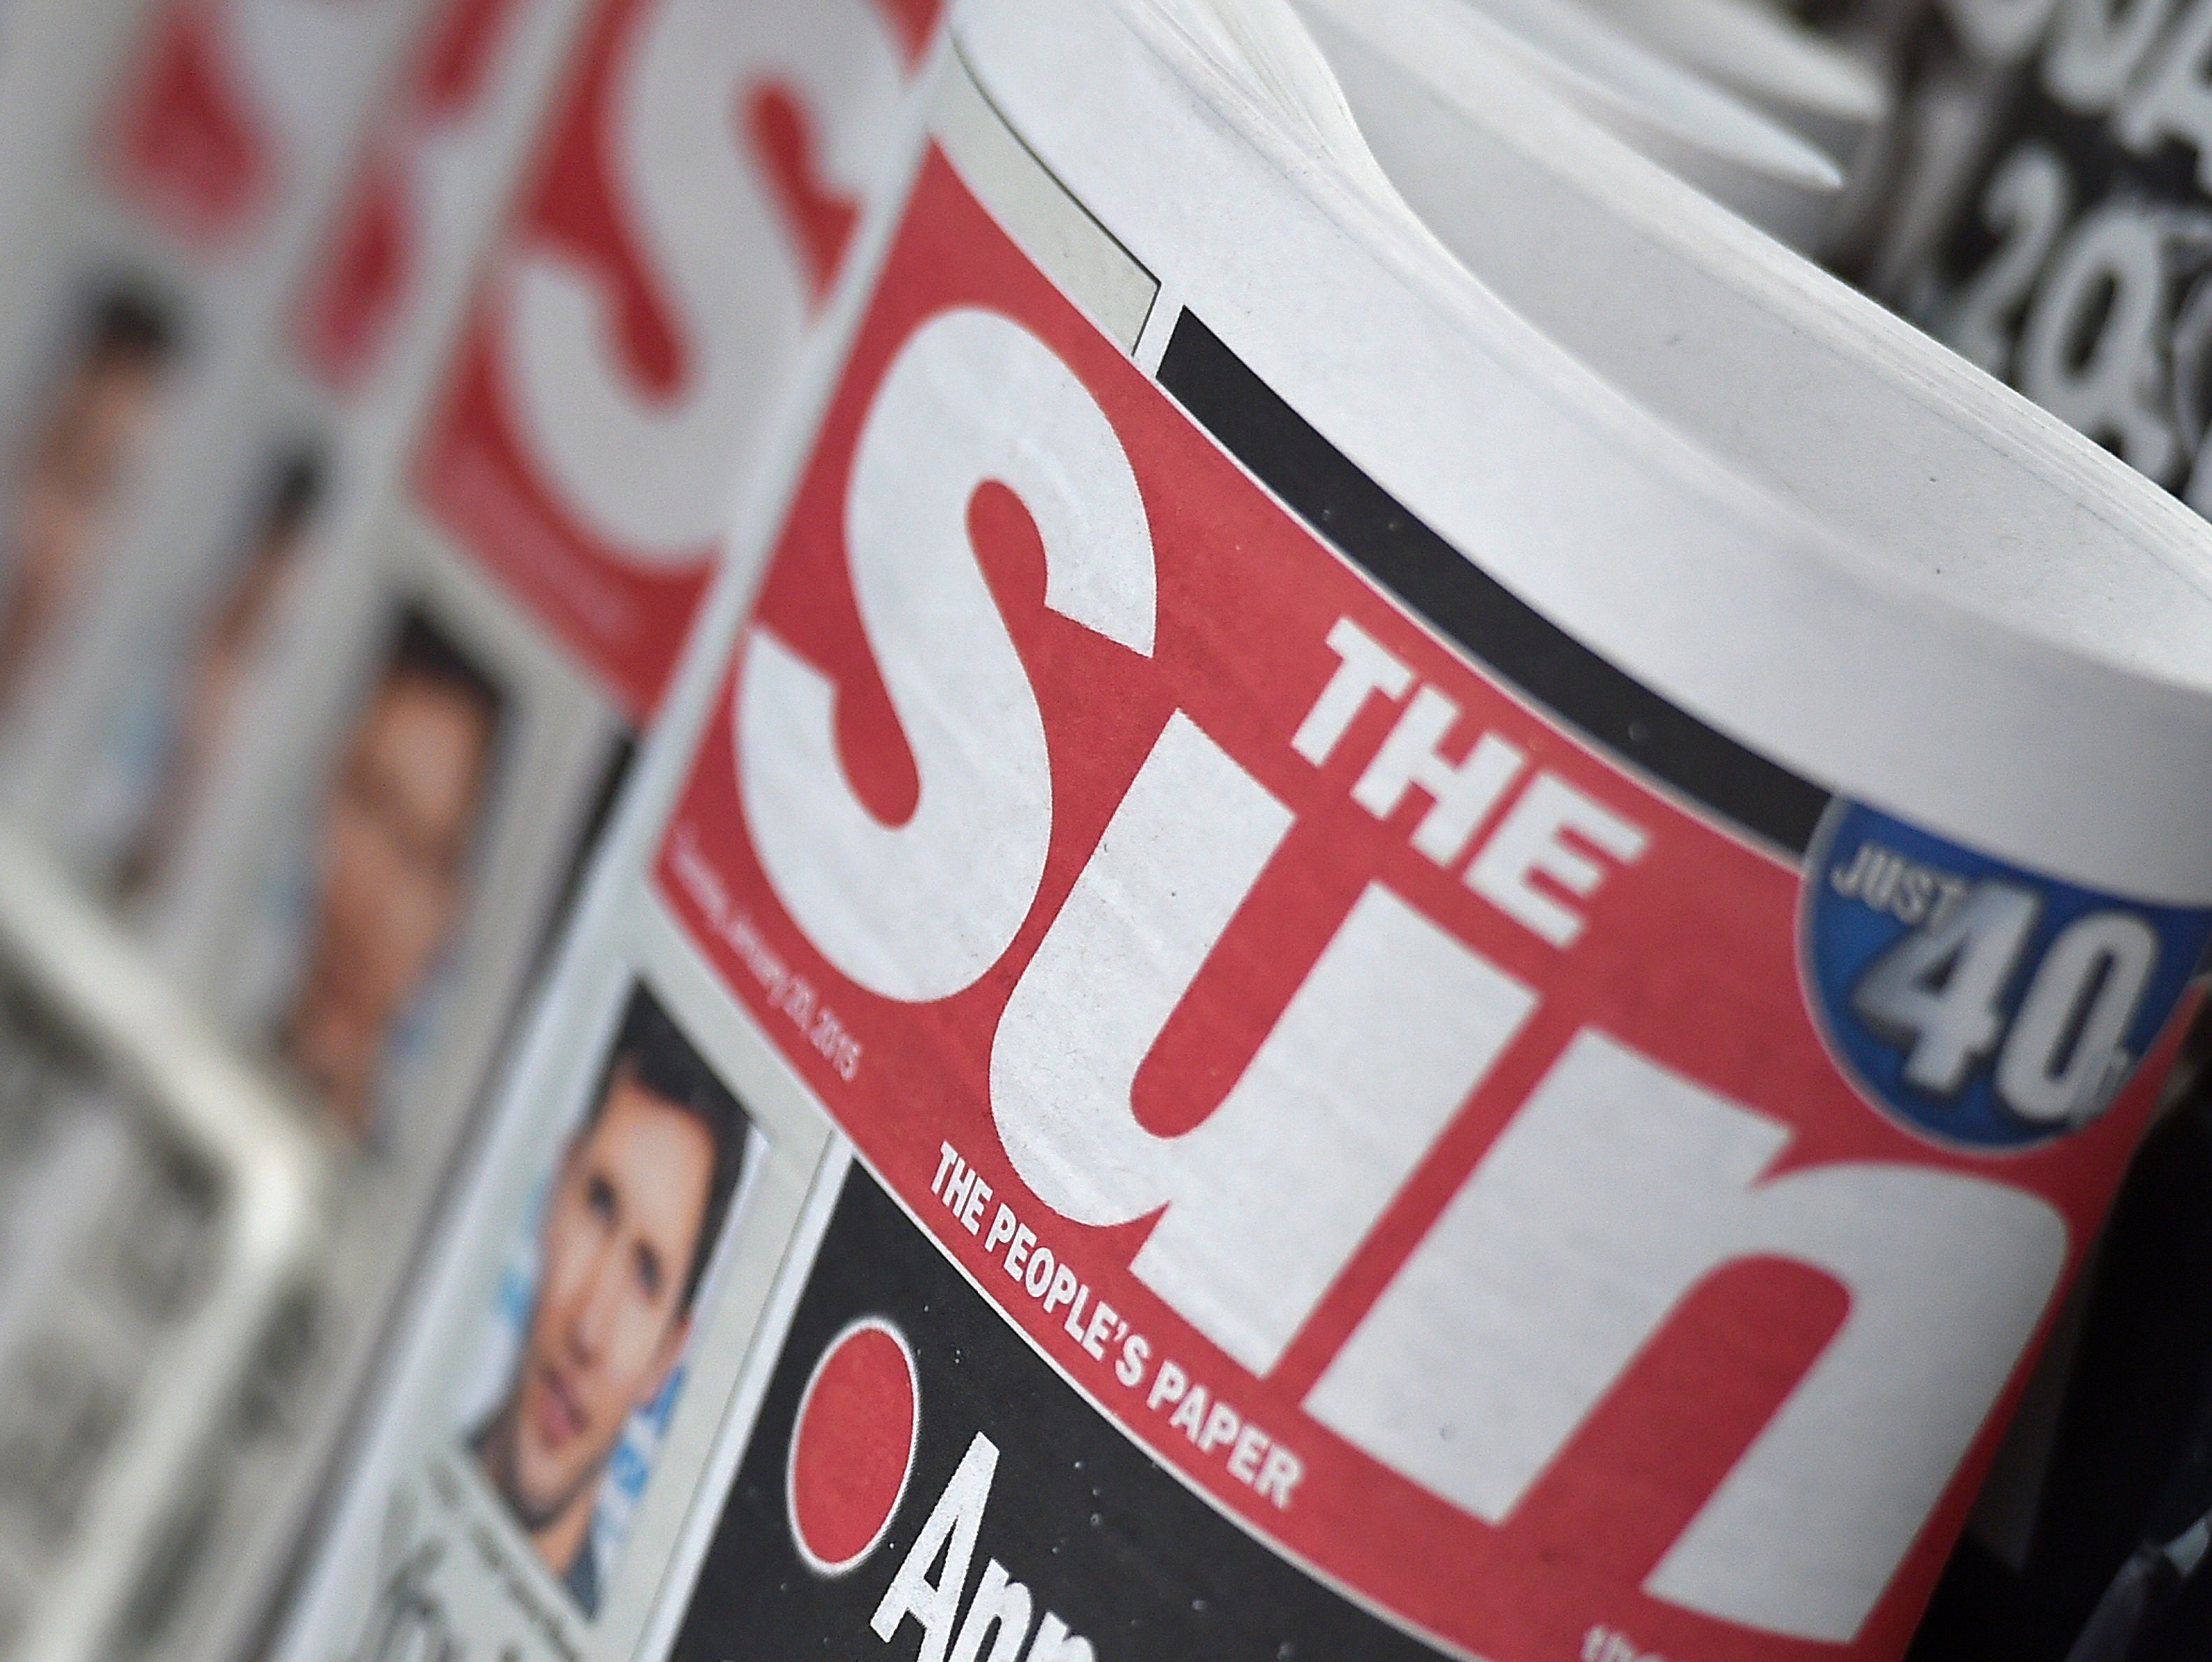 NRS readership data suggests The Sun has gained 11m readers per month since the fall of its paywall